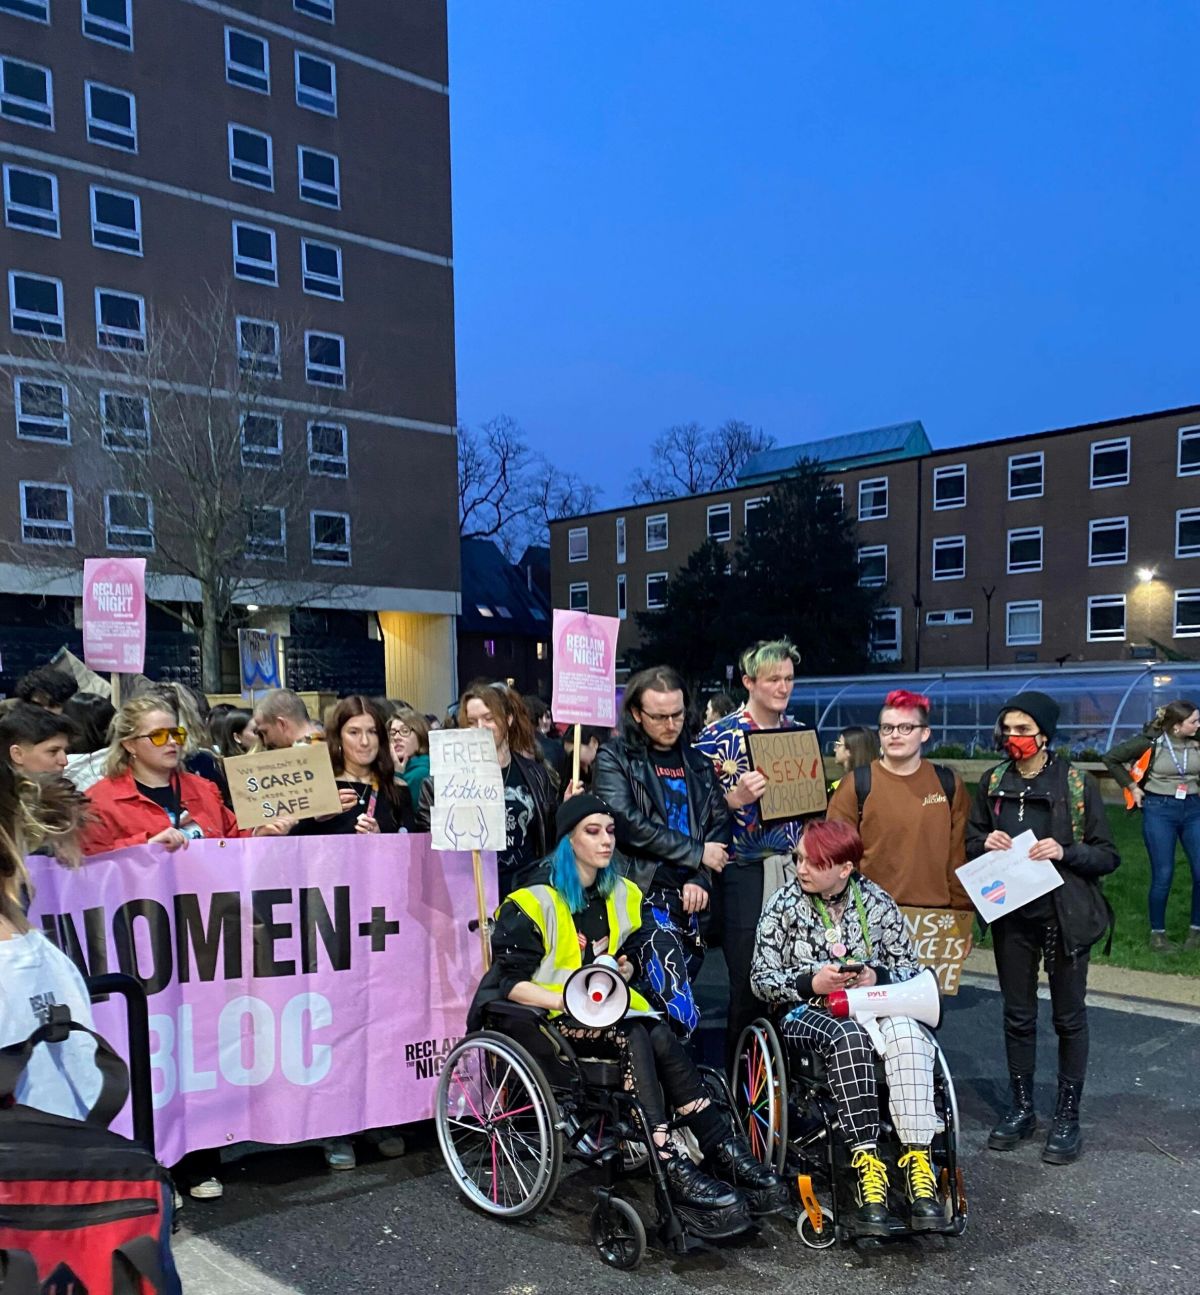 “45 years and what’s changed?”: Manchester students unite for Reclaim the Night’s 45th anniversary march